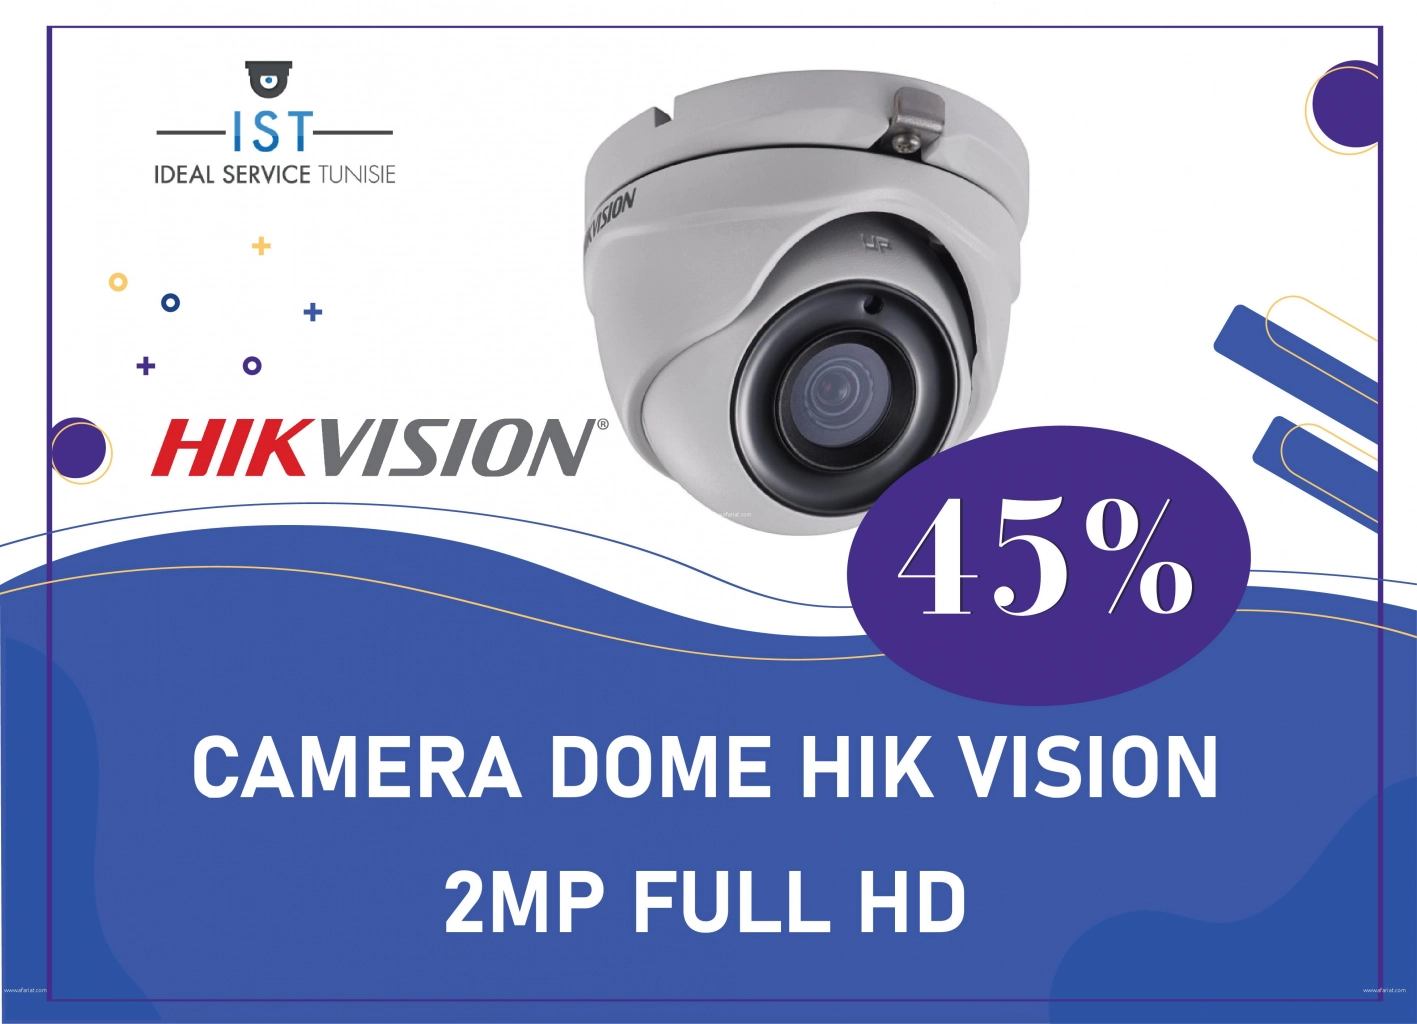 IST: CAMERA DOME HIKVISION 2MP FULL HD